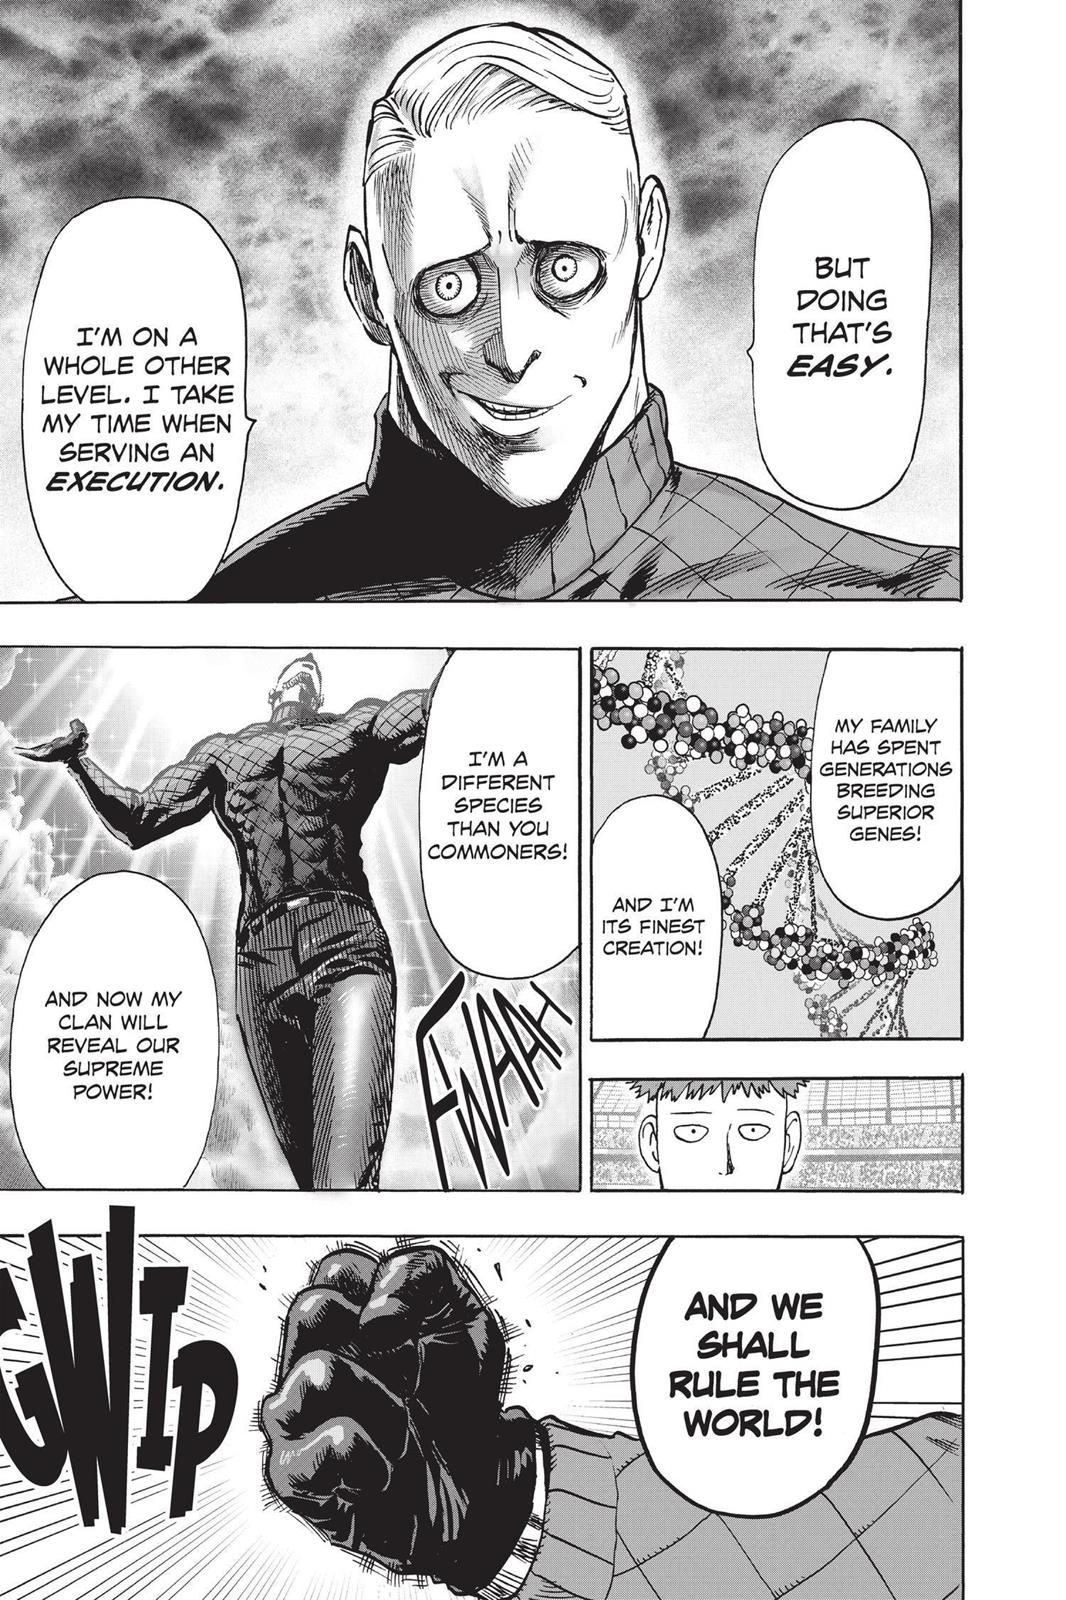 One-Punch Man, Punch 69 image 34